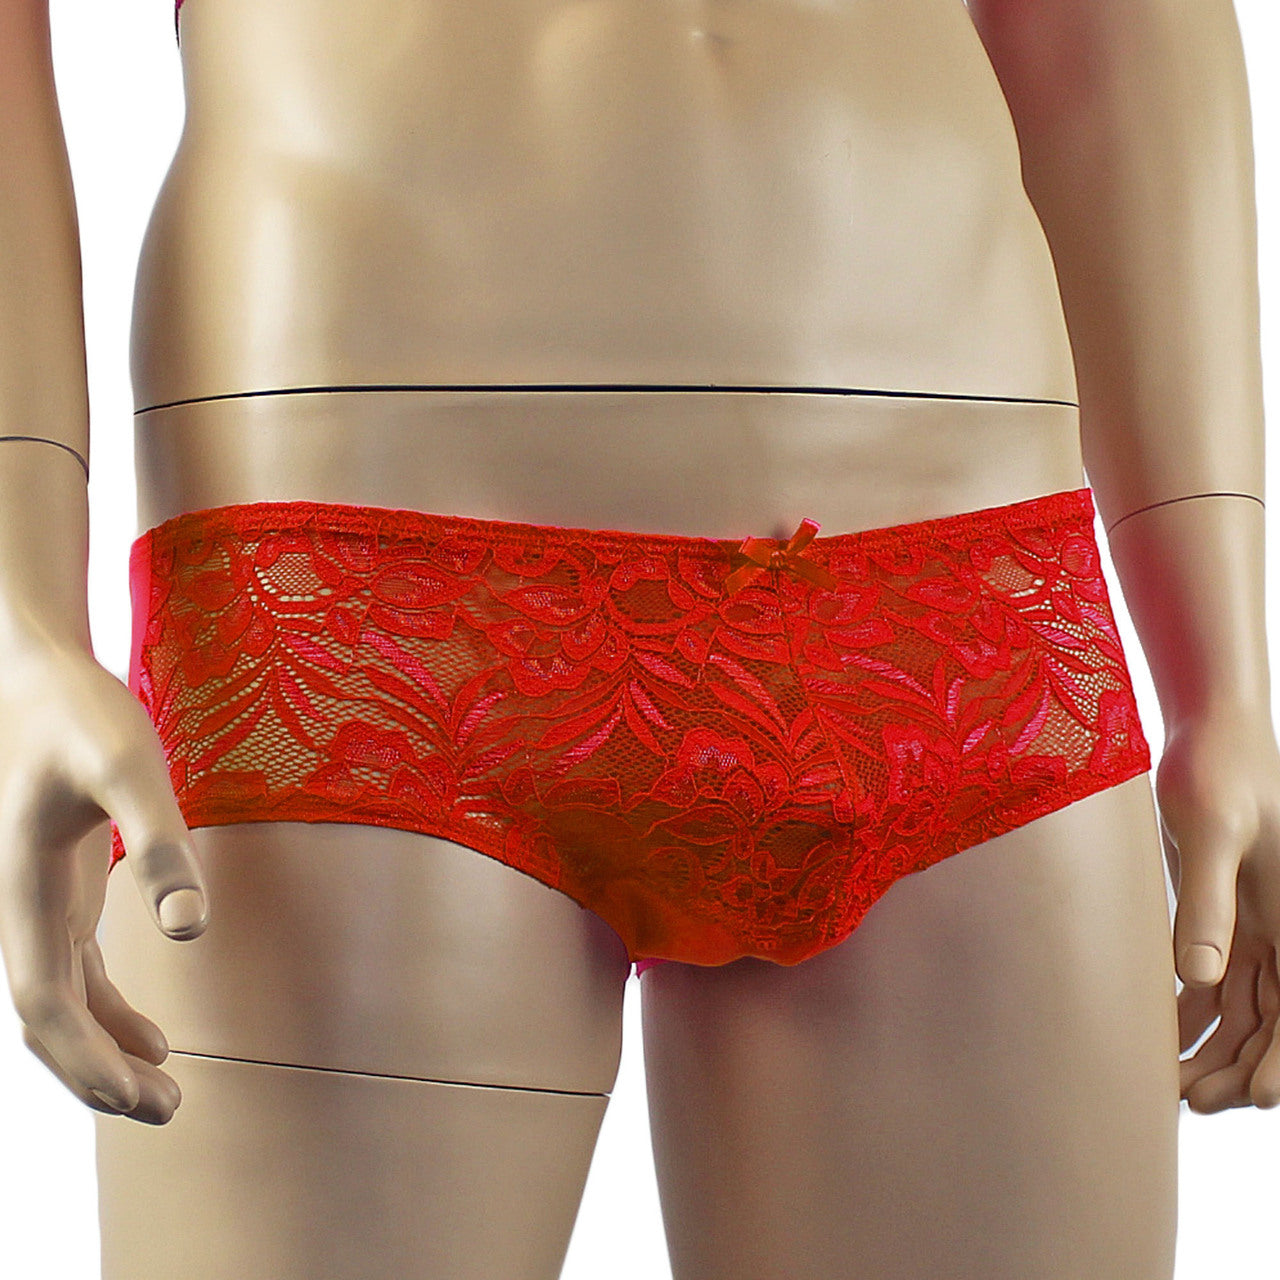 Mens Kristy Lingerie Sexy Lace and Mesh Panty Brief Red